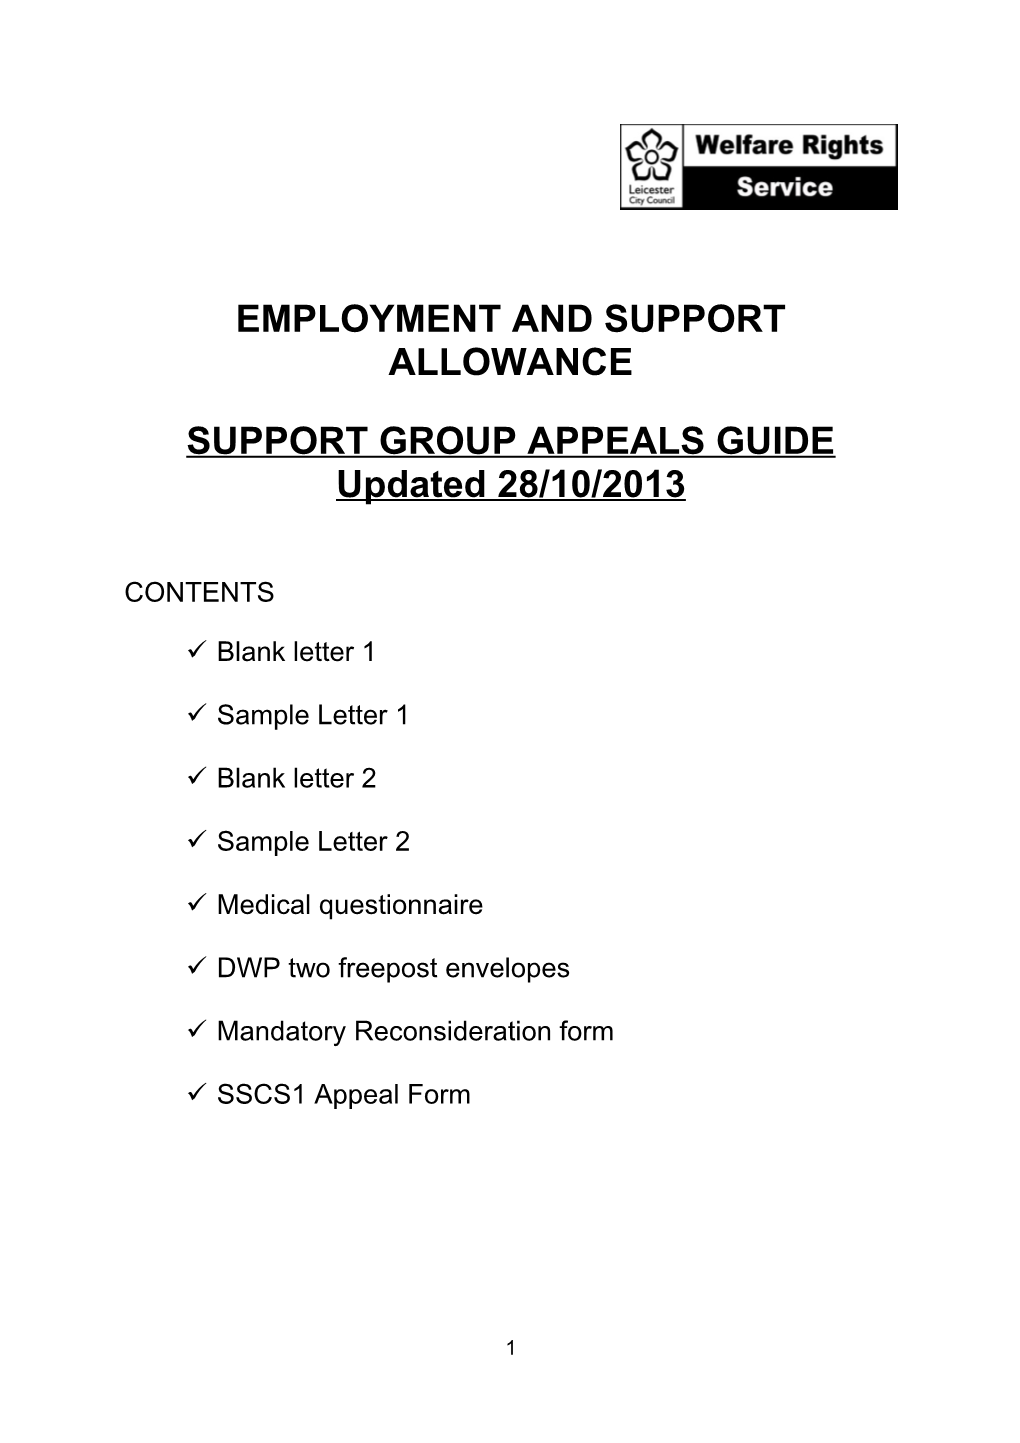 ESA Support Group Appeals Guide